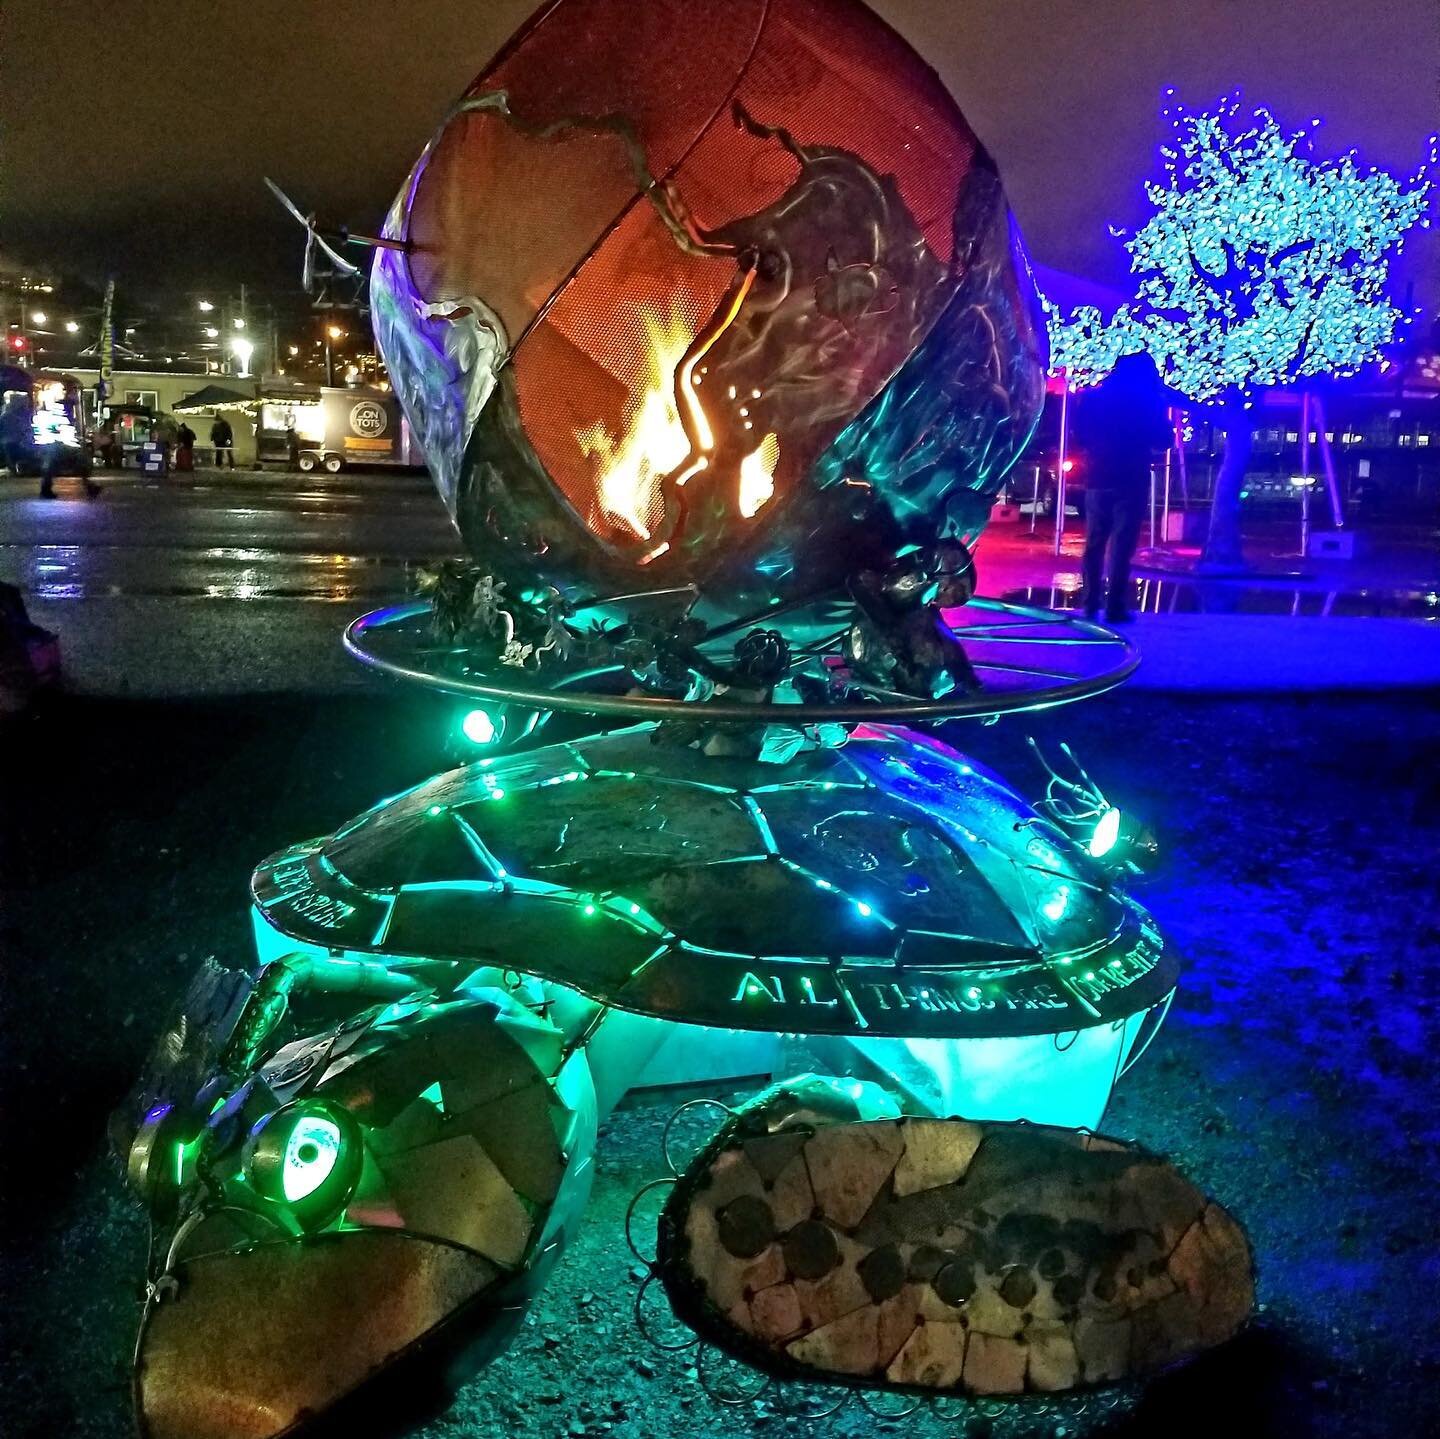 Golden Valentine&rsquo;s Day 2019 memories of the cosmic fire turtles triumphant debut at portland winter light fest then going on to win an award at winterfest nw in bend ! Big thanks to the portal crew for working so hard on the mighty turtle , to 